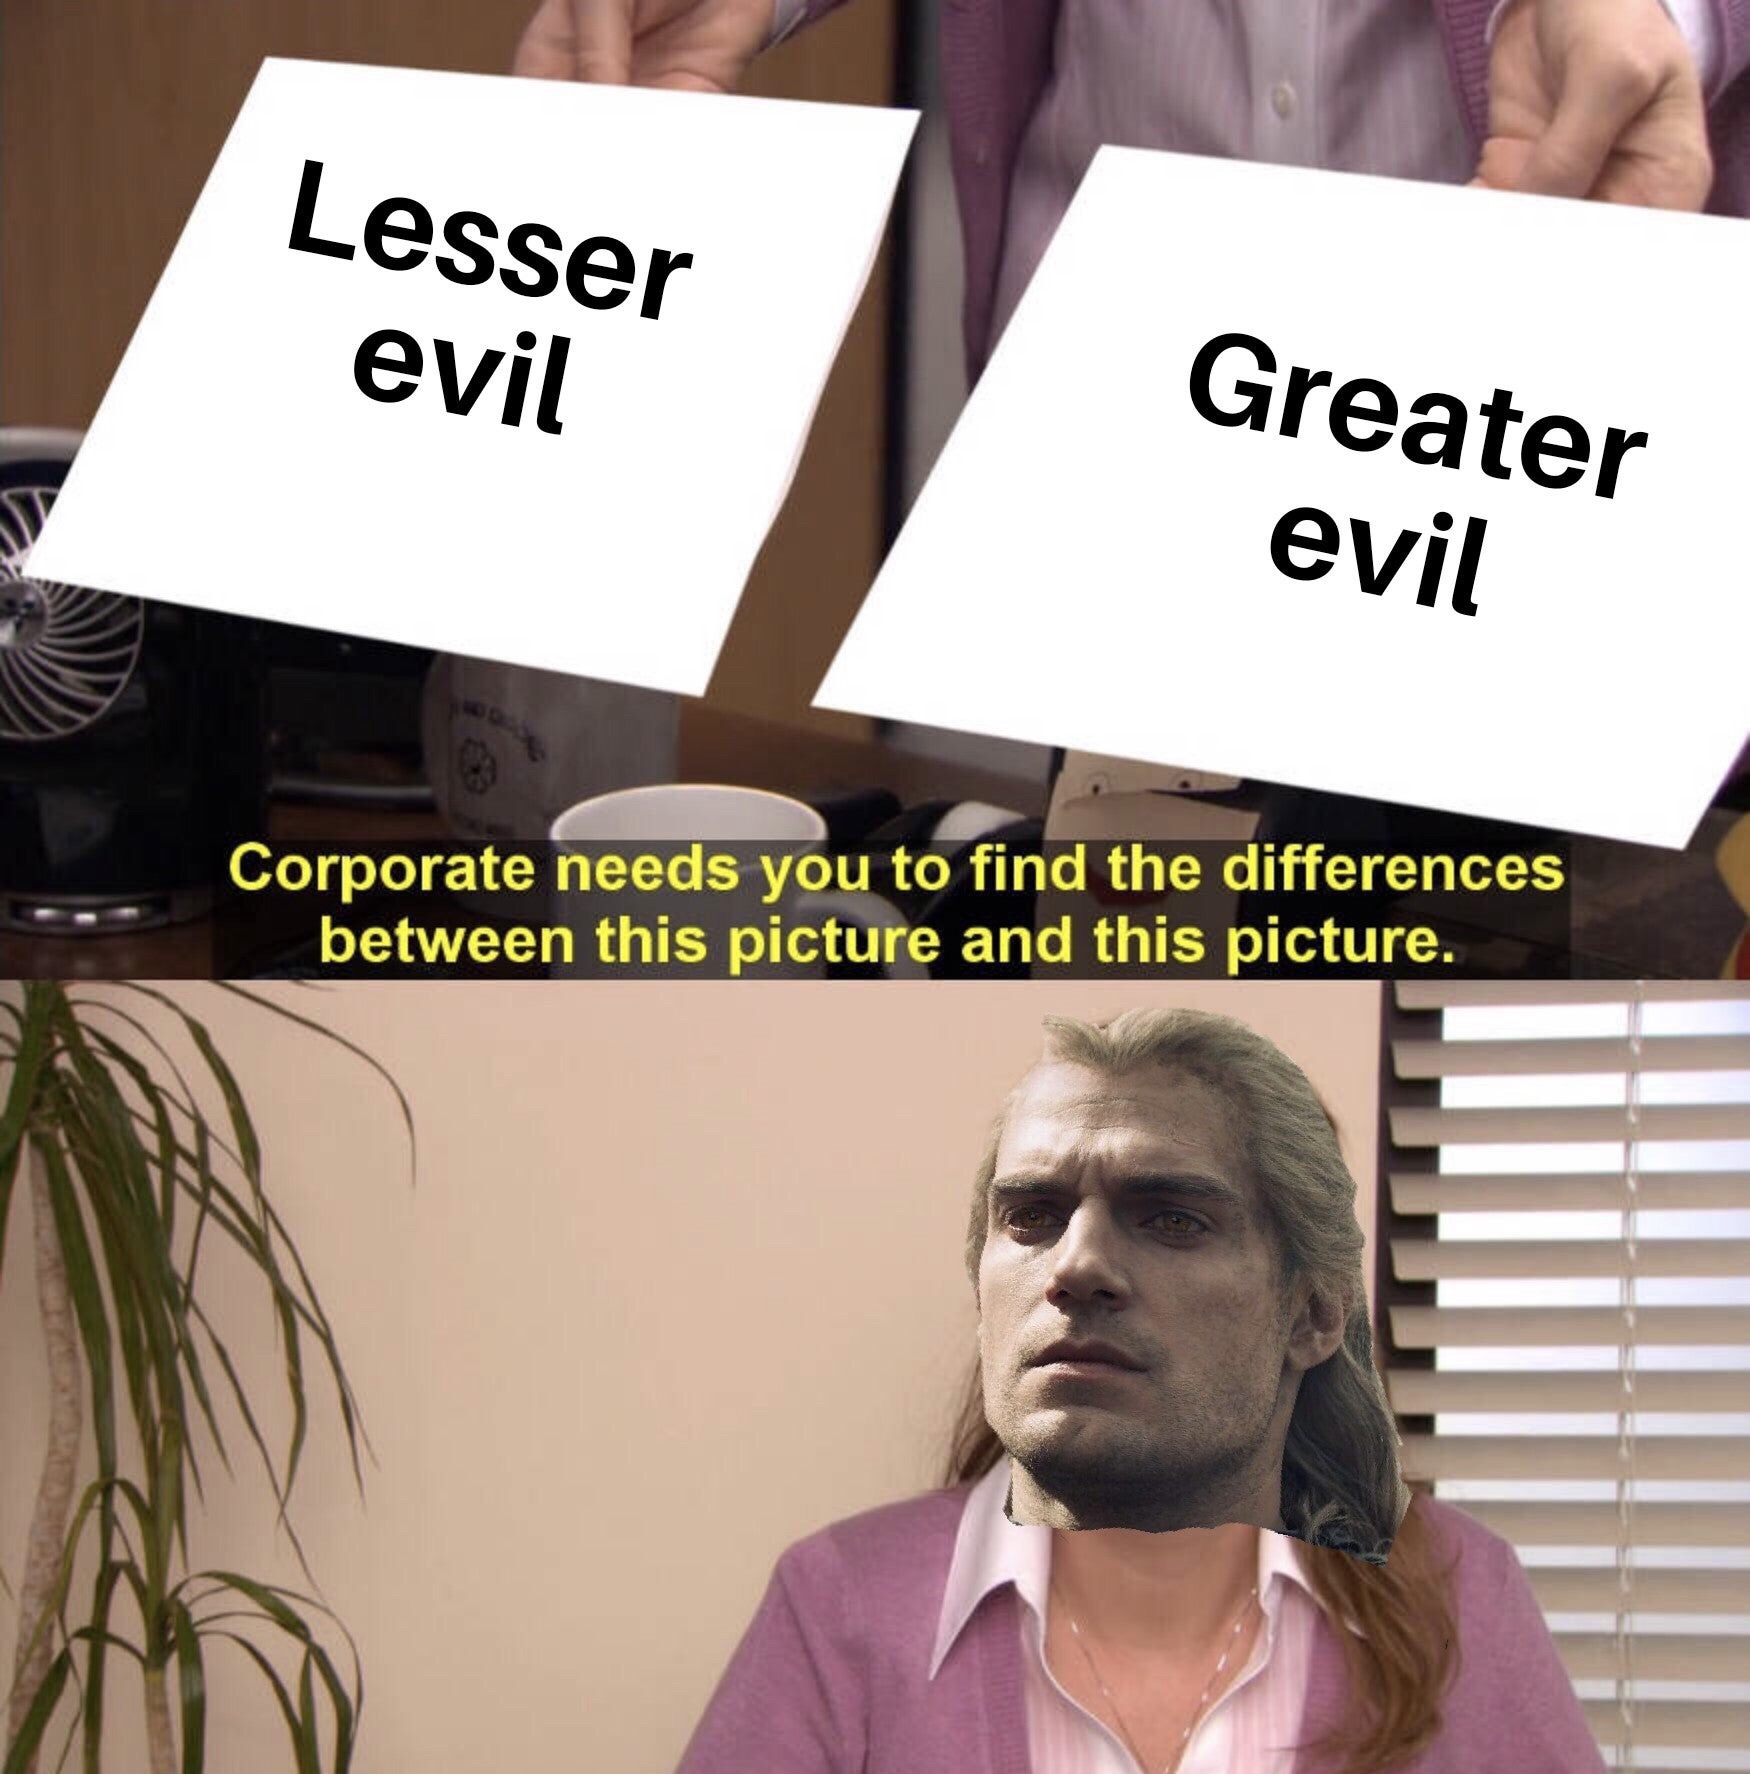 complex analysis meme - Lesser evil Greater evil Corporate needs you to find the differences between this picture and this picture.